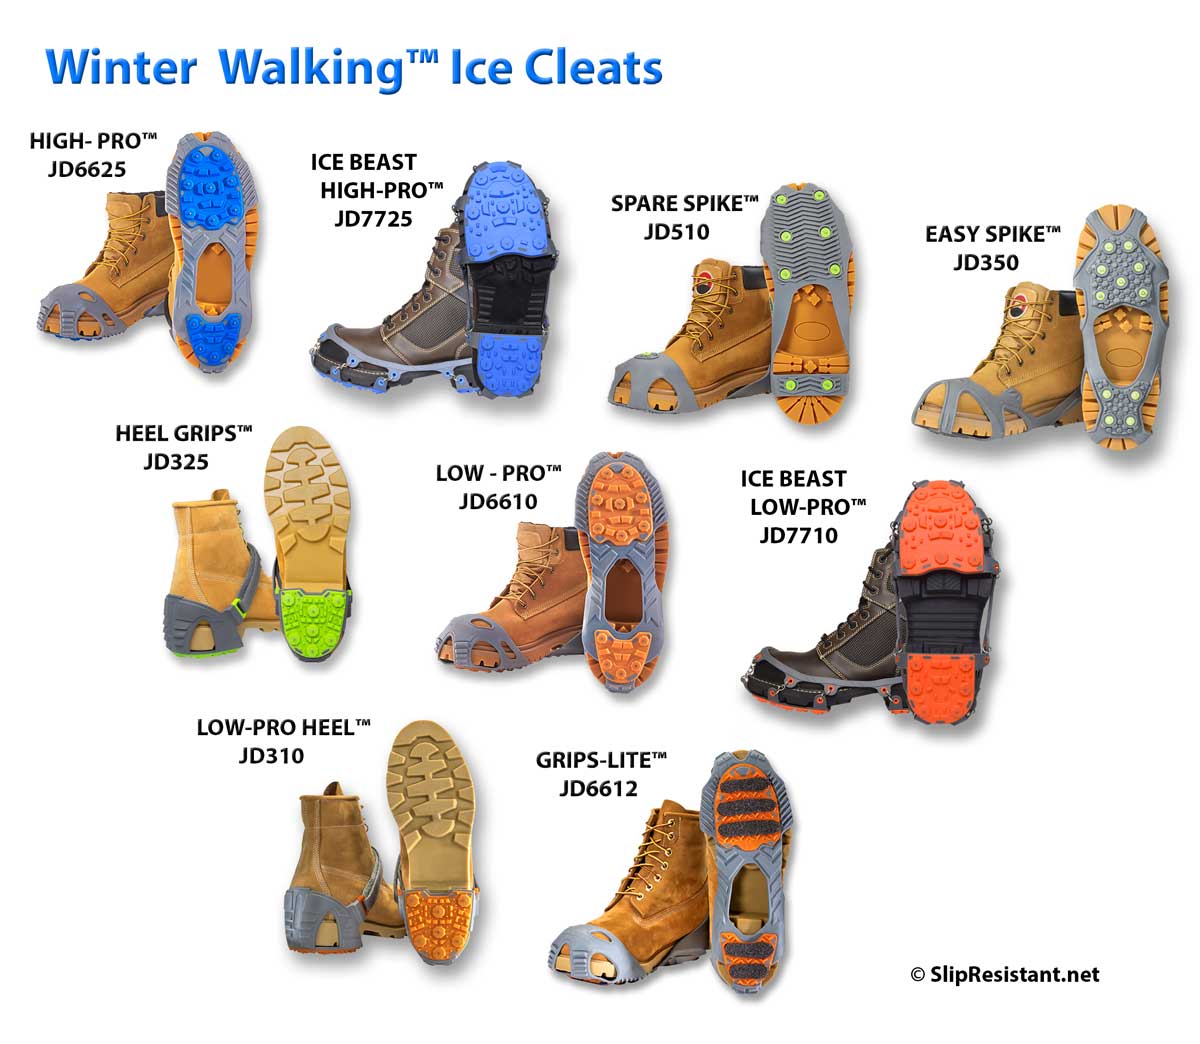 Winter Walking Ice Cleats for Shoes and Boots